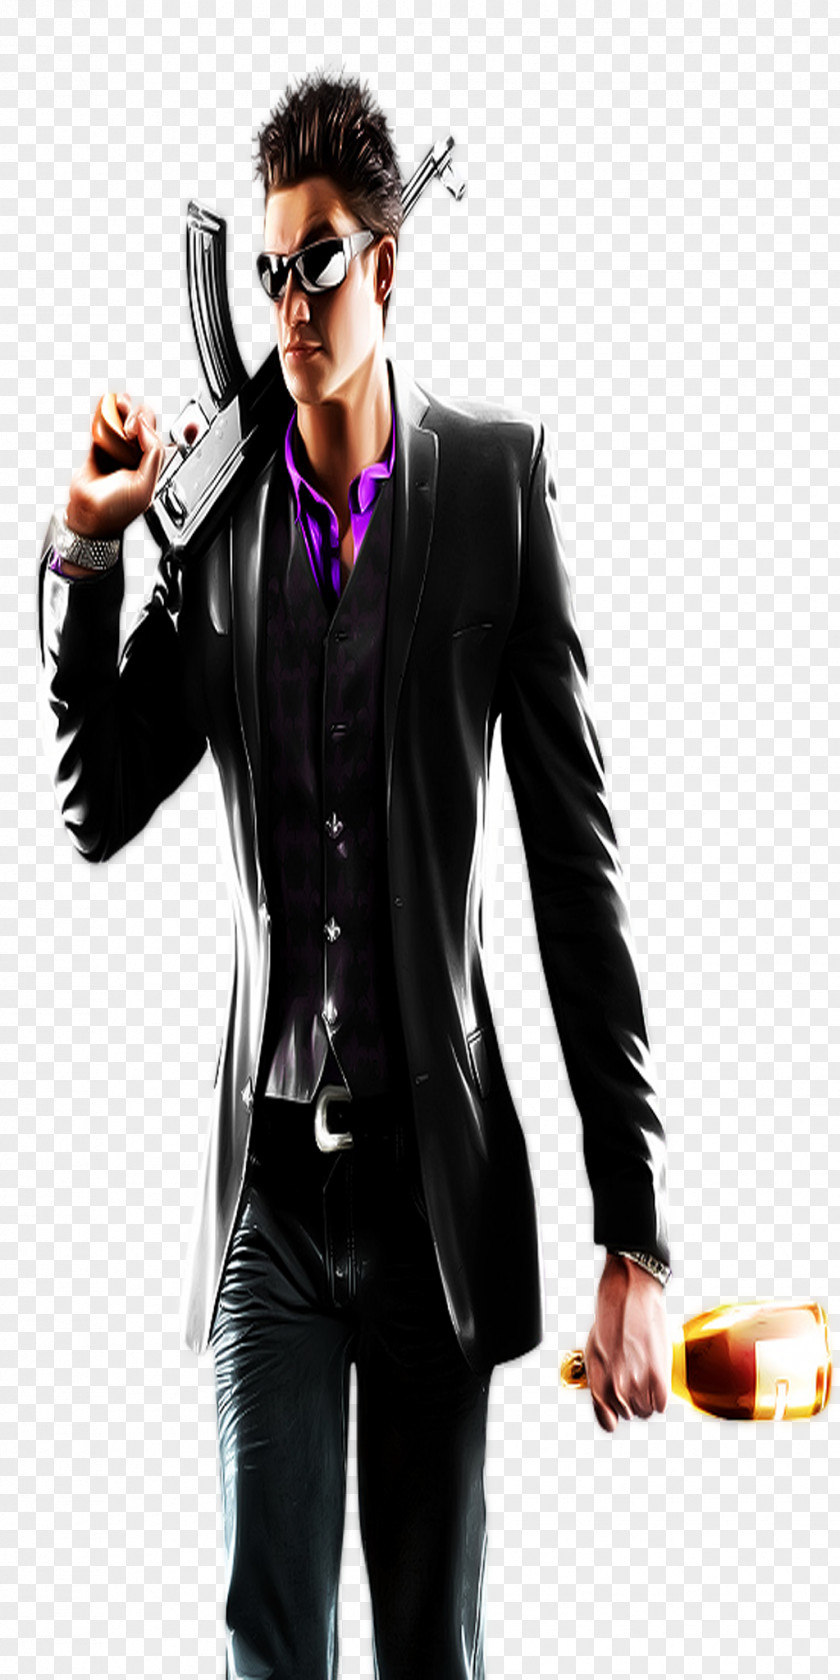 Rowing Saints Row: The Third Row IV 2 Video Game Boss PNG